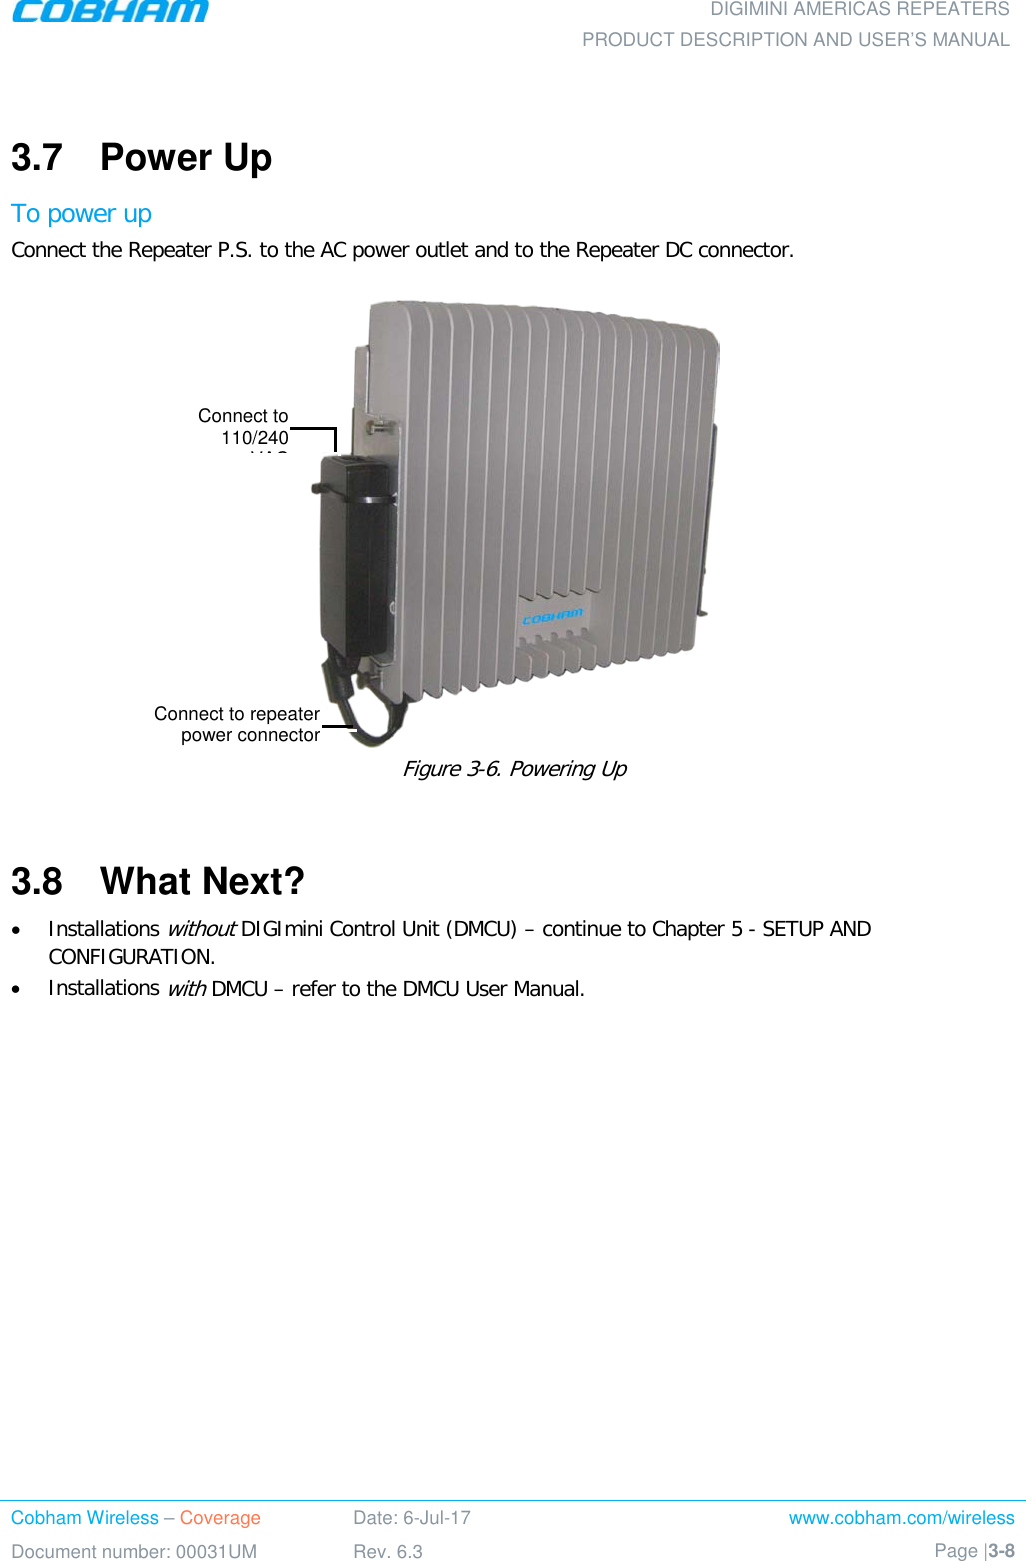  DIGIMINI AMERICAS REPEATERS PRODUCT DESCRIPTION AND USER’S MANUAL Cobham Wireless – Coverage Date: 6-Jul-17 www.cobham.com/wireless Document number: 00031UM Rev. 6.3 Page |3-8   3.7  Power Up To power up Connect the Repeater P.S. to the AC power outlet and to the Repeater DC connector.    Figure  3-6. Powering Up  3.8  What Next? • Installations without DIGImini Control Unit (DMCU) – continue to Chapter  5 - SETUP AND CONFIGURATION. • Installations with DMCU – refer to the DMCU User Manual. Connect to 110/240 VAC  Connect to repeater power connector 